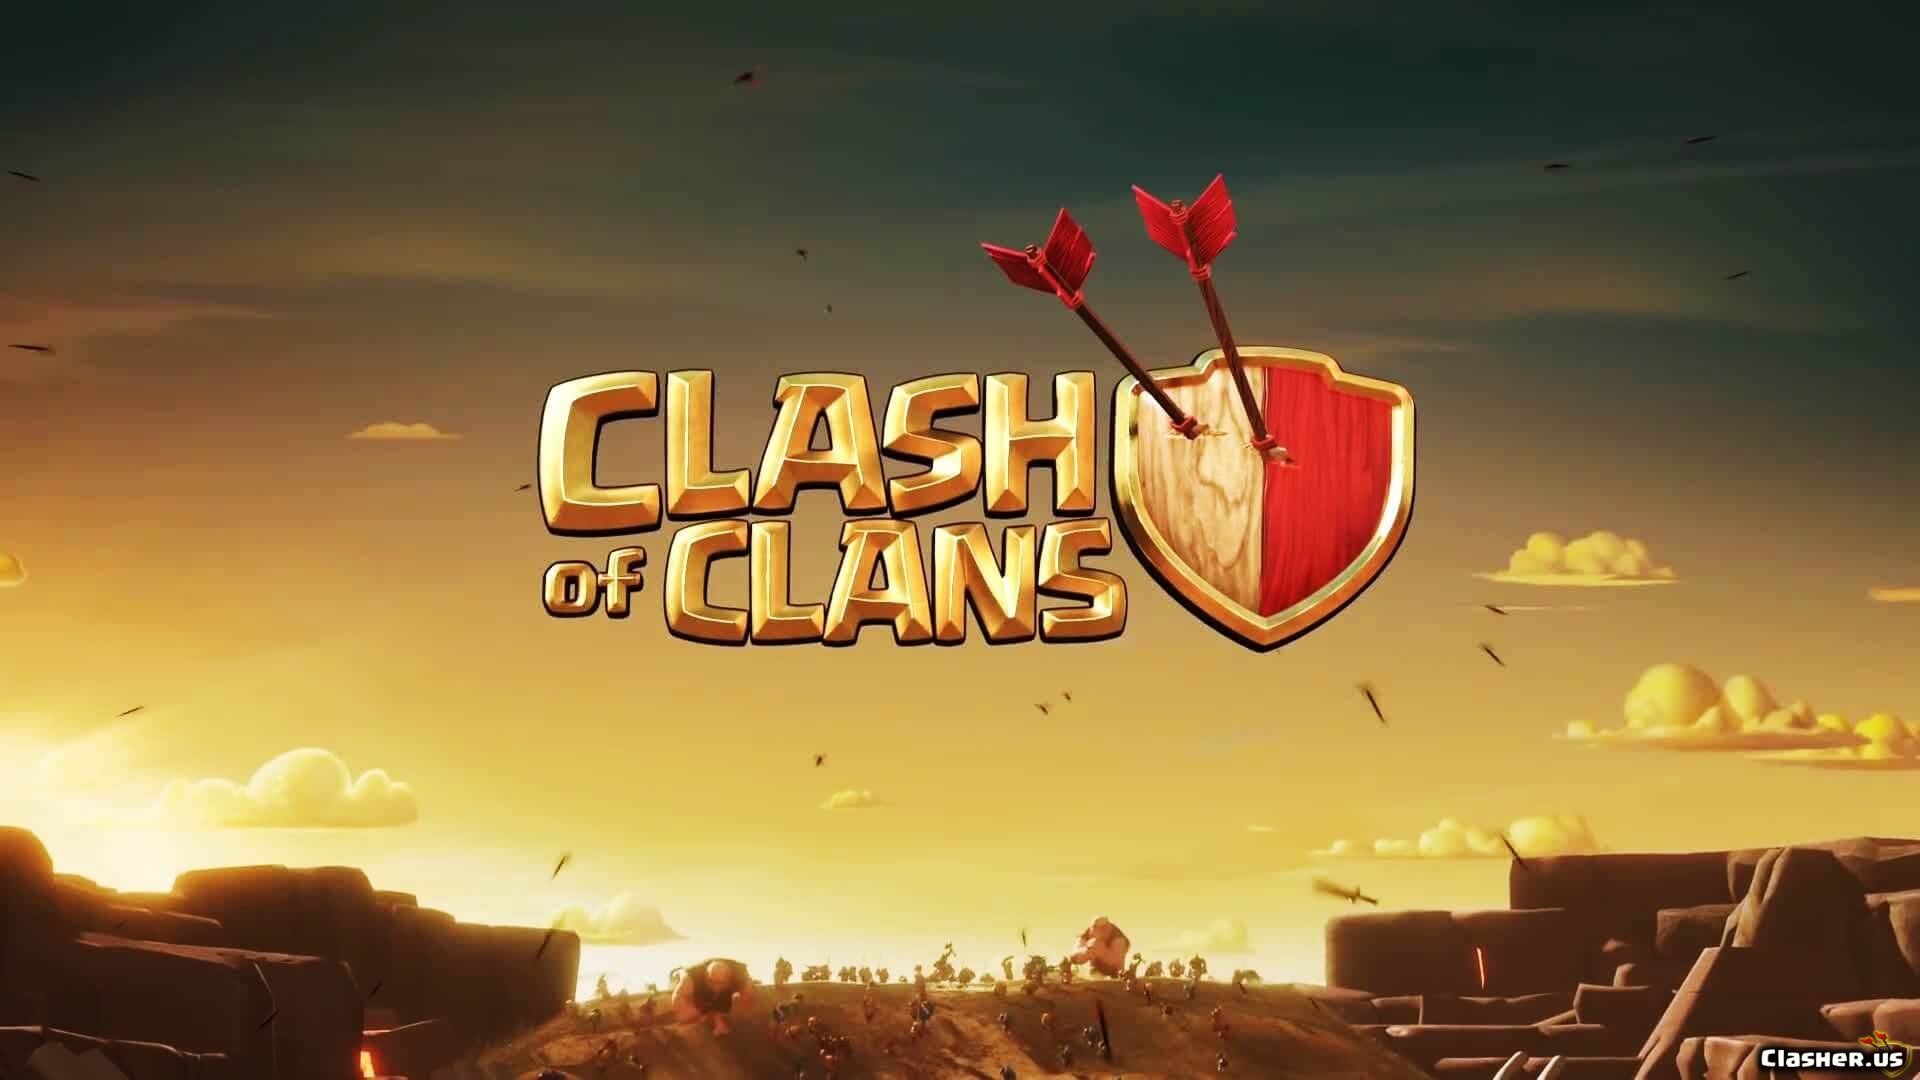 Clash Of Clans 2021 Wallpapers - Wallpaper Cave